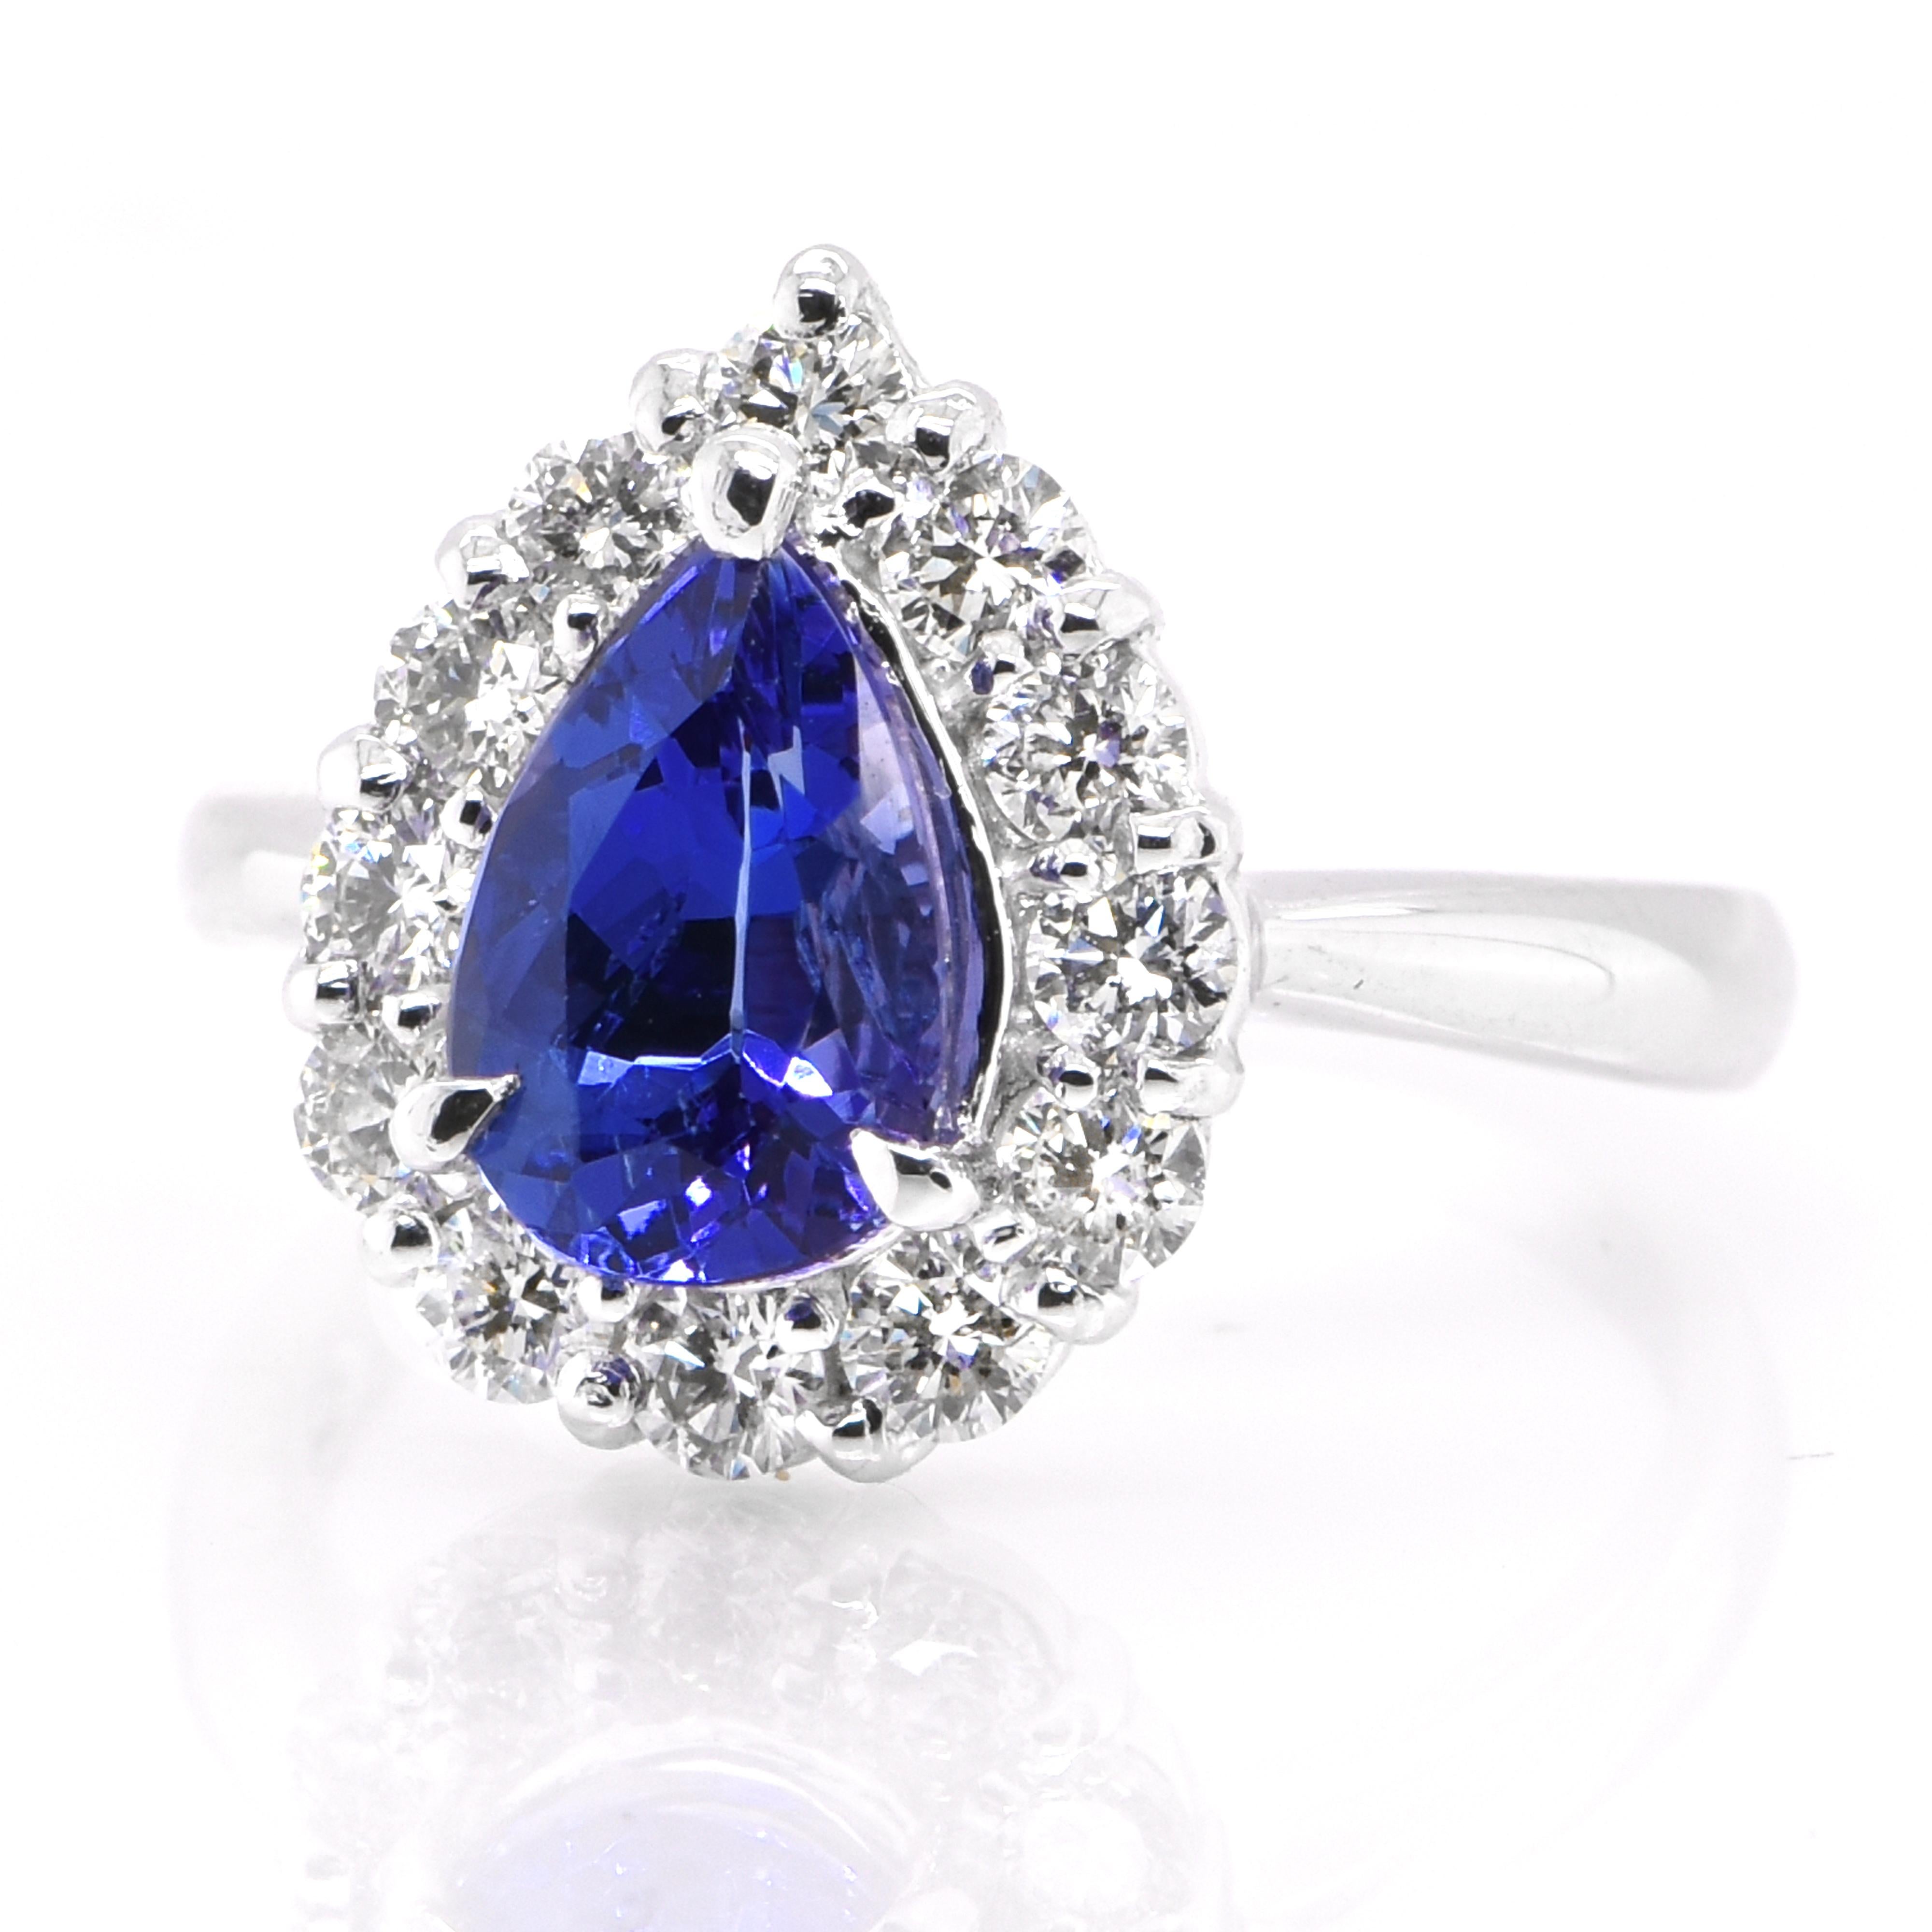 A beautiful ring featuring a 1.69 Carat Natural Tanzanite and 0.71 Carats Diamond Accents set in Platinum. Tanzanite's name was given by Tiffany and Co after its only known source: Tanzania. Tanzanite displays beautiful pleochroic colors meaning